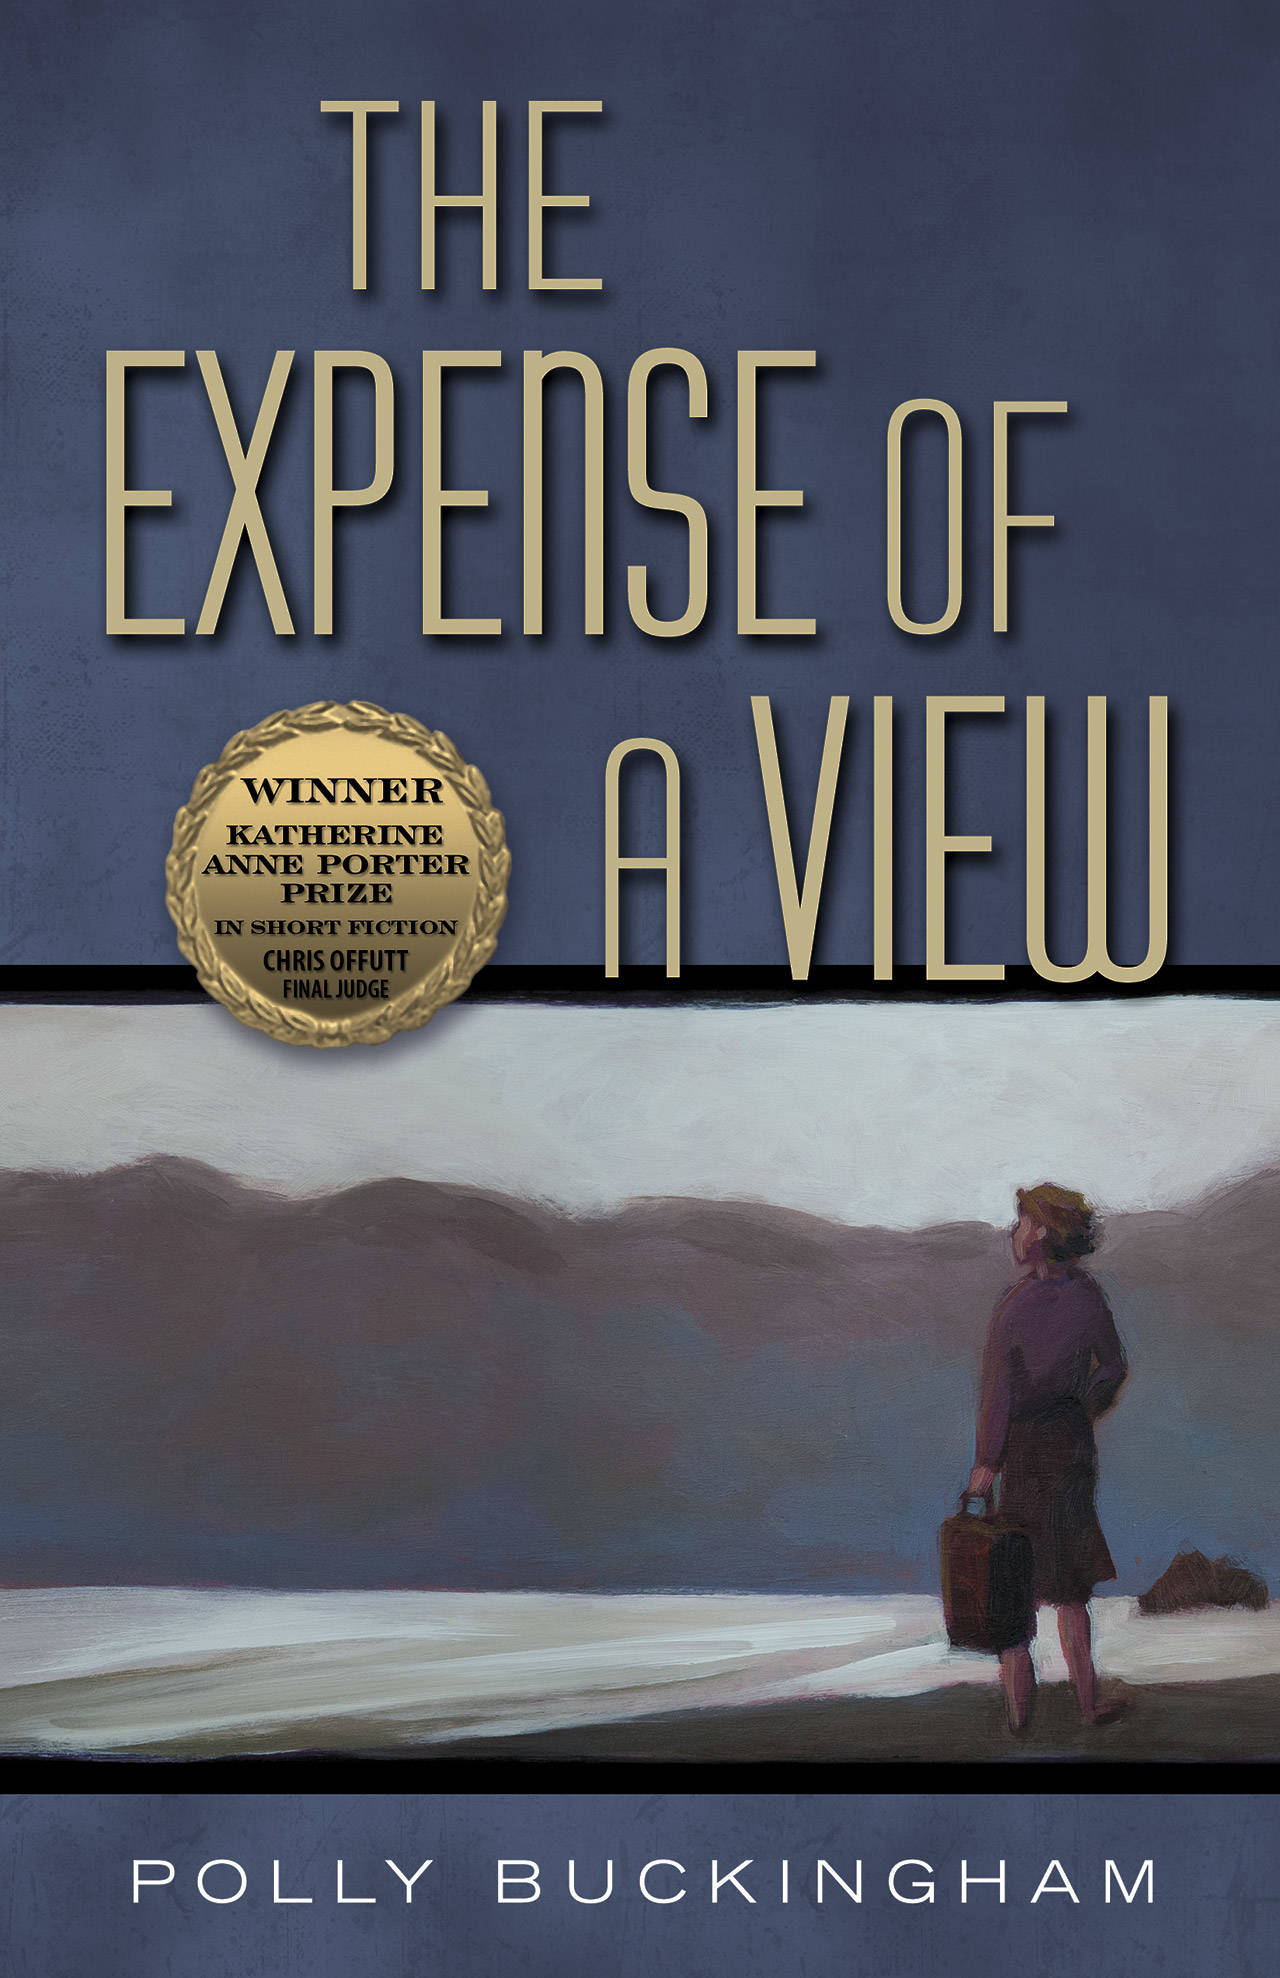 Image courtesy of Eagle Harbor Book Company                                Polly Buckingham, of Spokane, will visit Eagle Harbor Book Company at 7 p.m. Thursday, March 30 to discuss her new short story collection “The Expense of a View.”